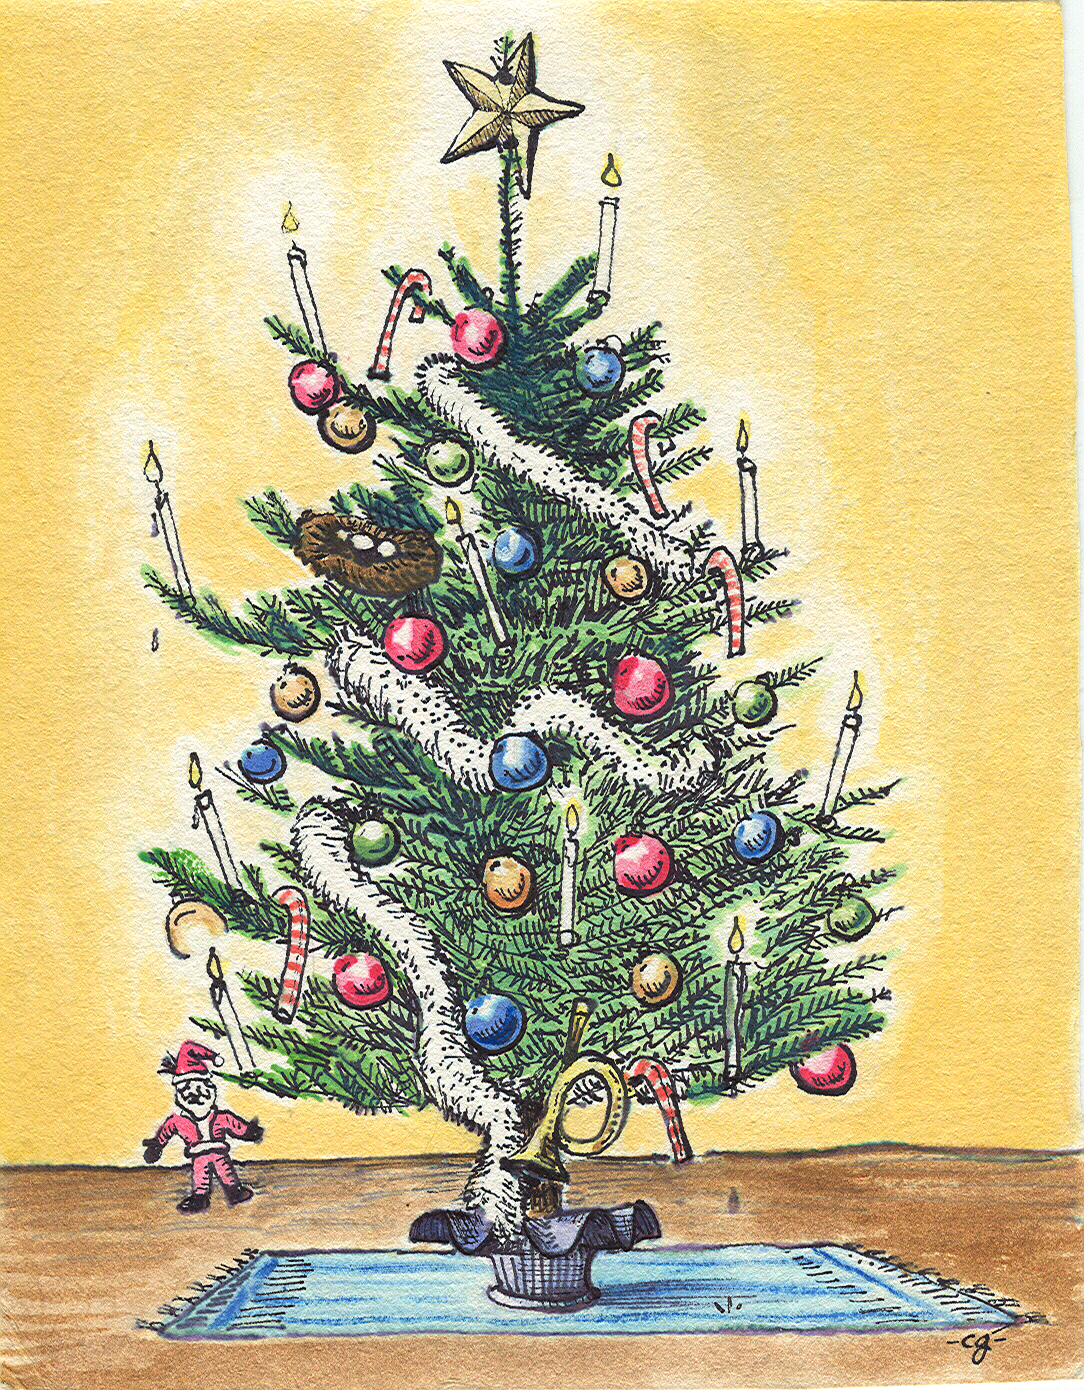 Our Christmas Tree! The Grimble''''s holiday decoration. Illustration by Chris Gross.